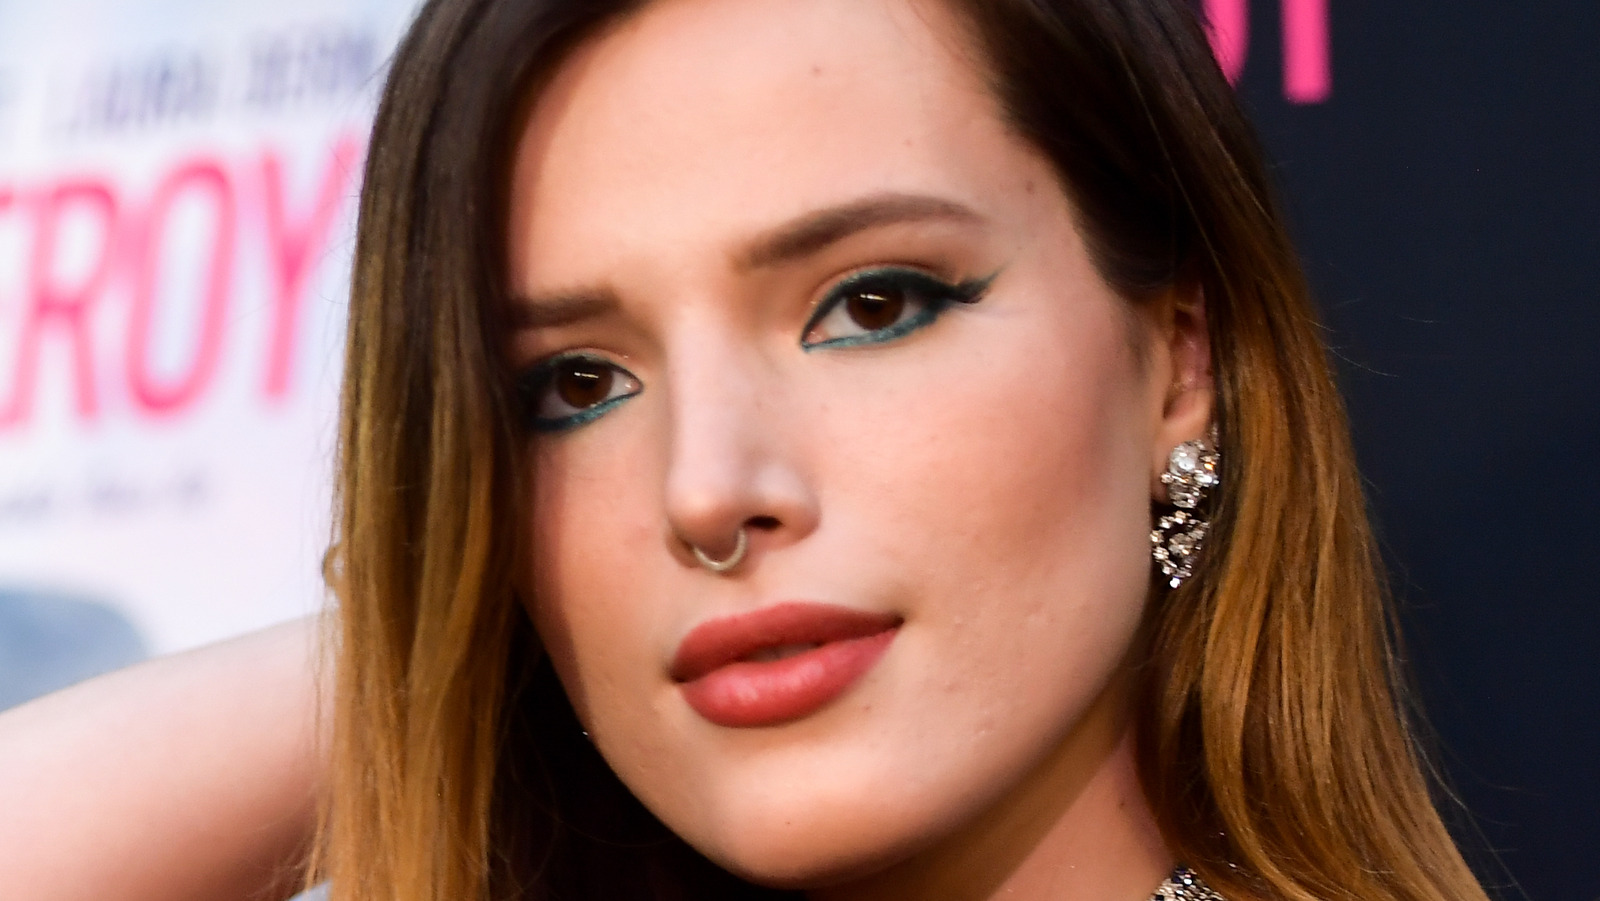 Bella Thorne Pissing Porn - The Truth About Bella Thorne's Scandals